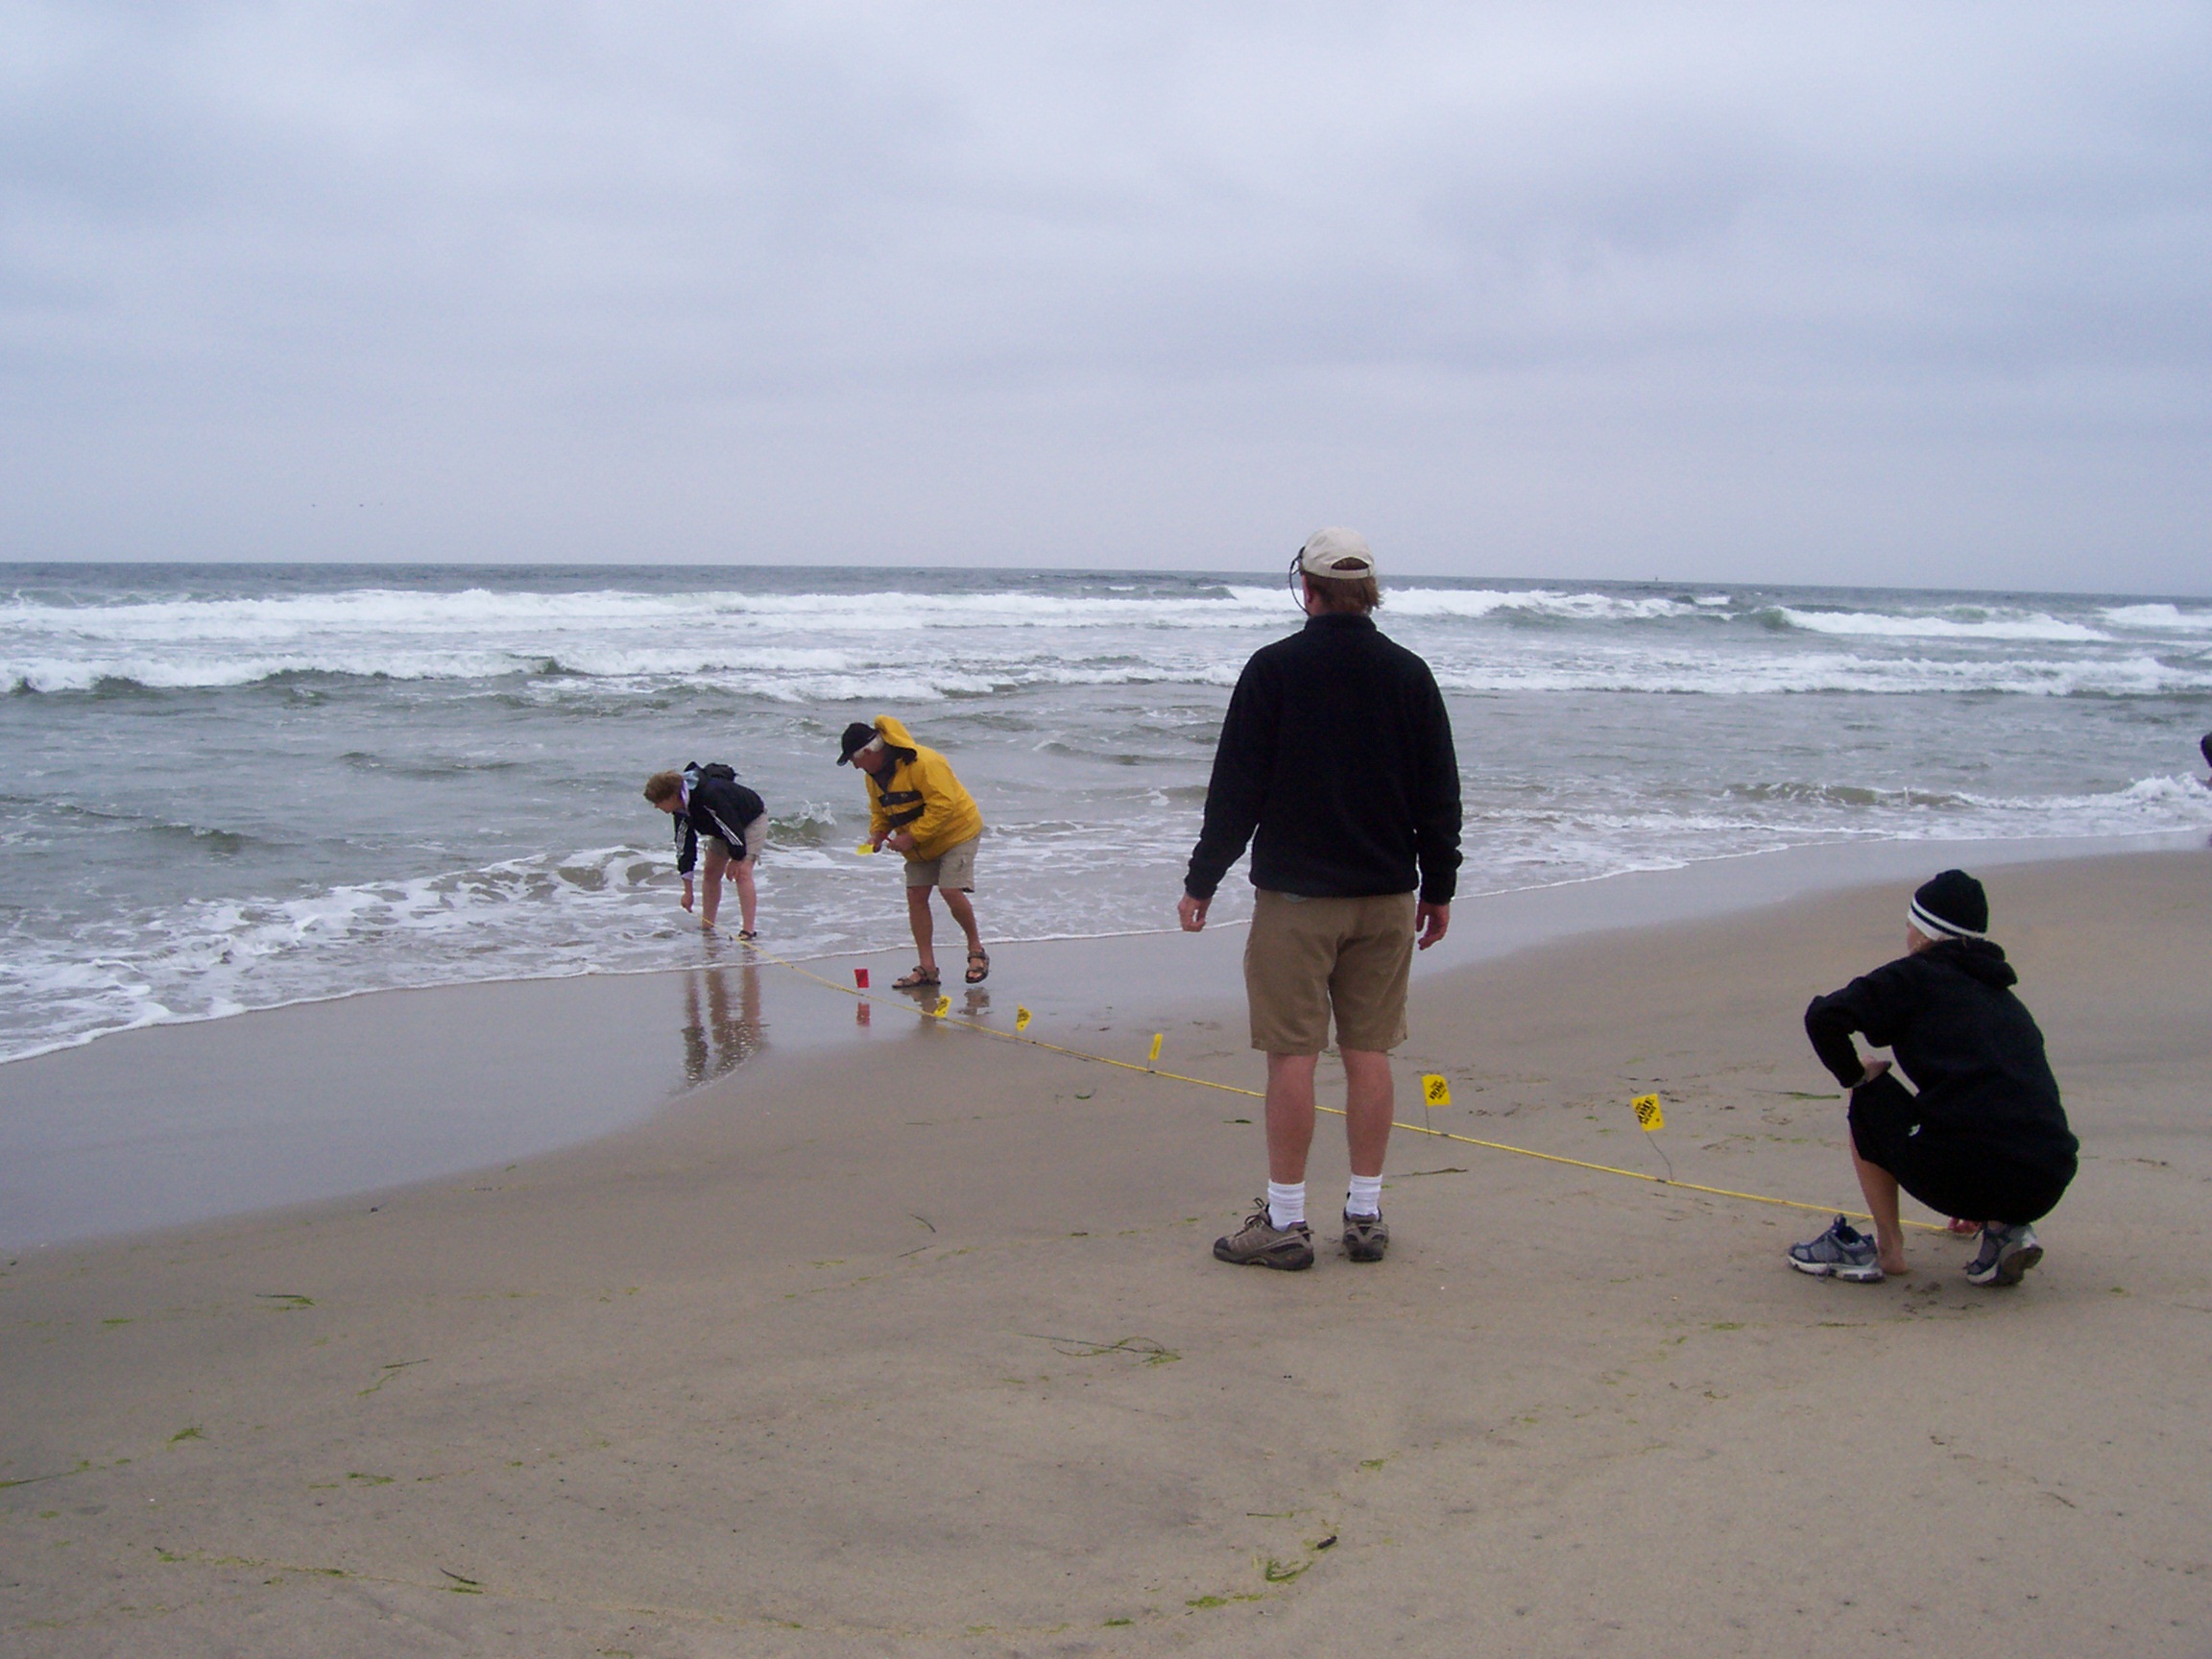 Braving the surf to sample sandcrabs